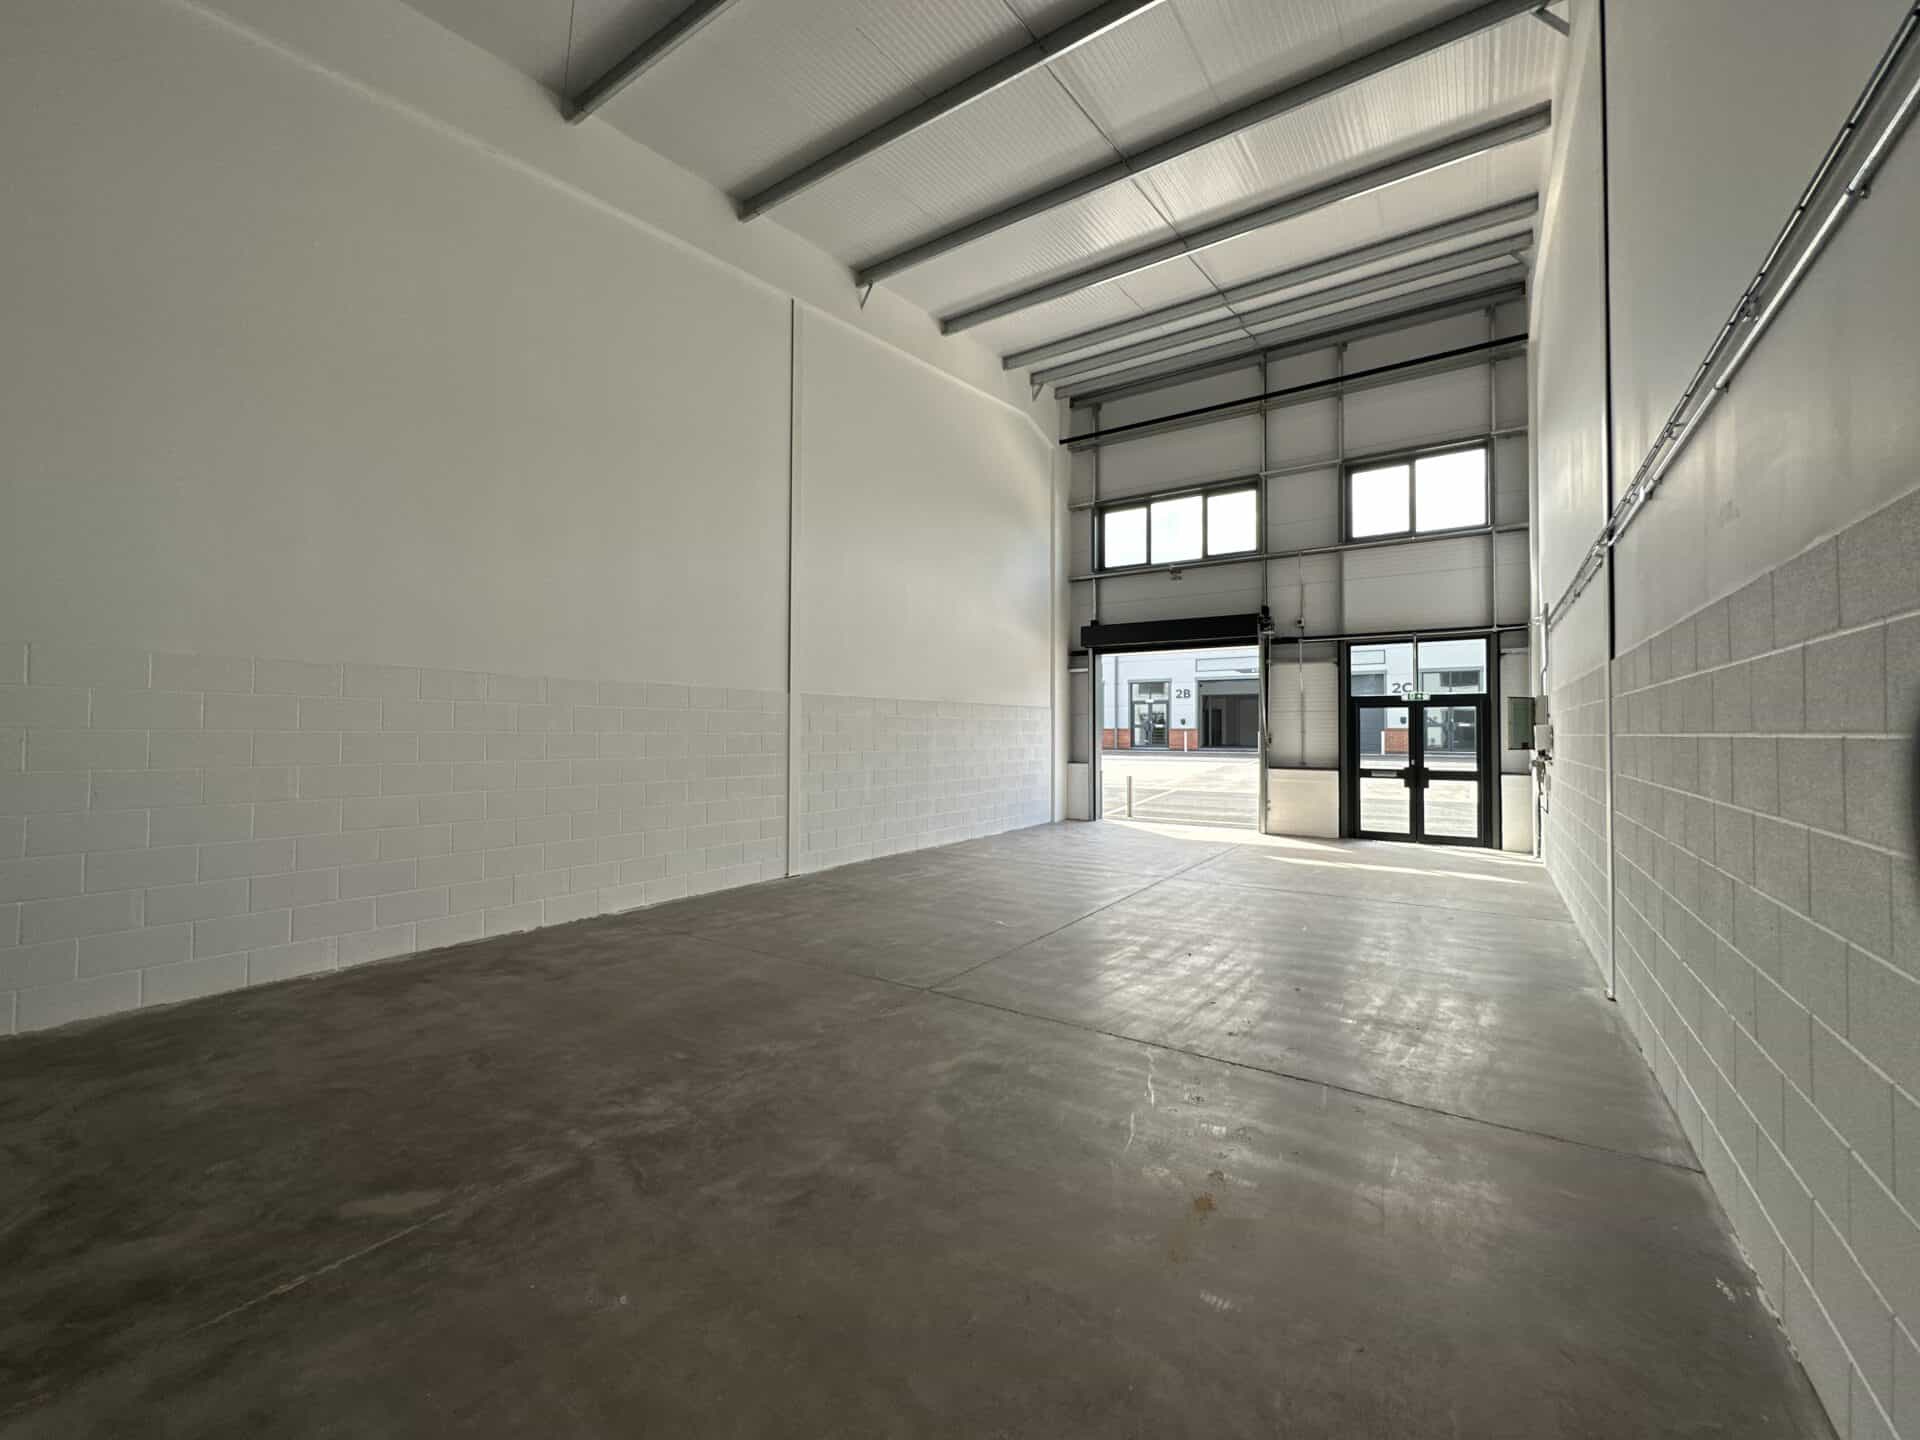 Interior view of a light industrial unit at Oak Tree, Kingskerswell, with a blank shell layout, offering flexibility for client-specific adaptations.